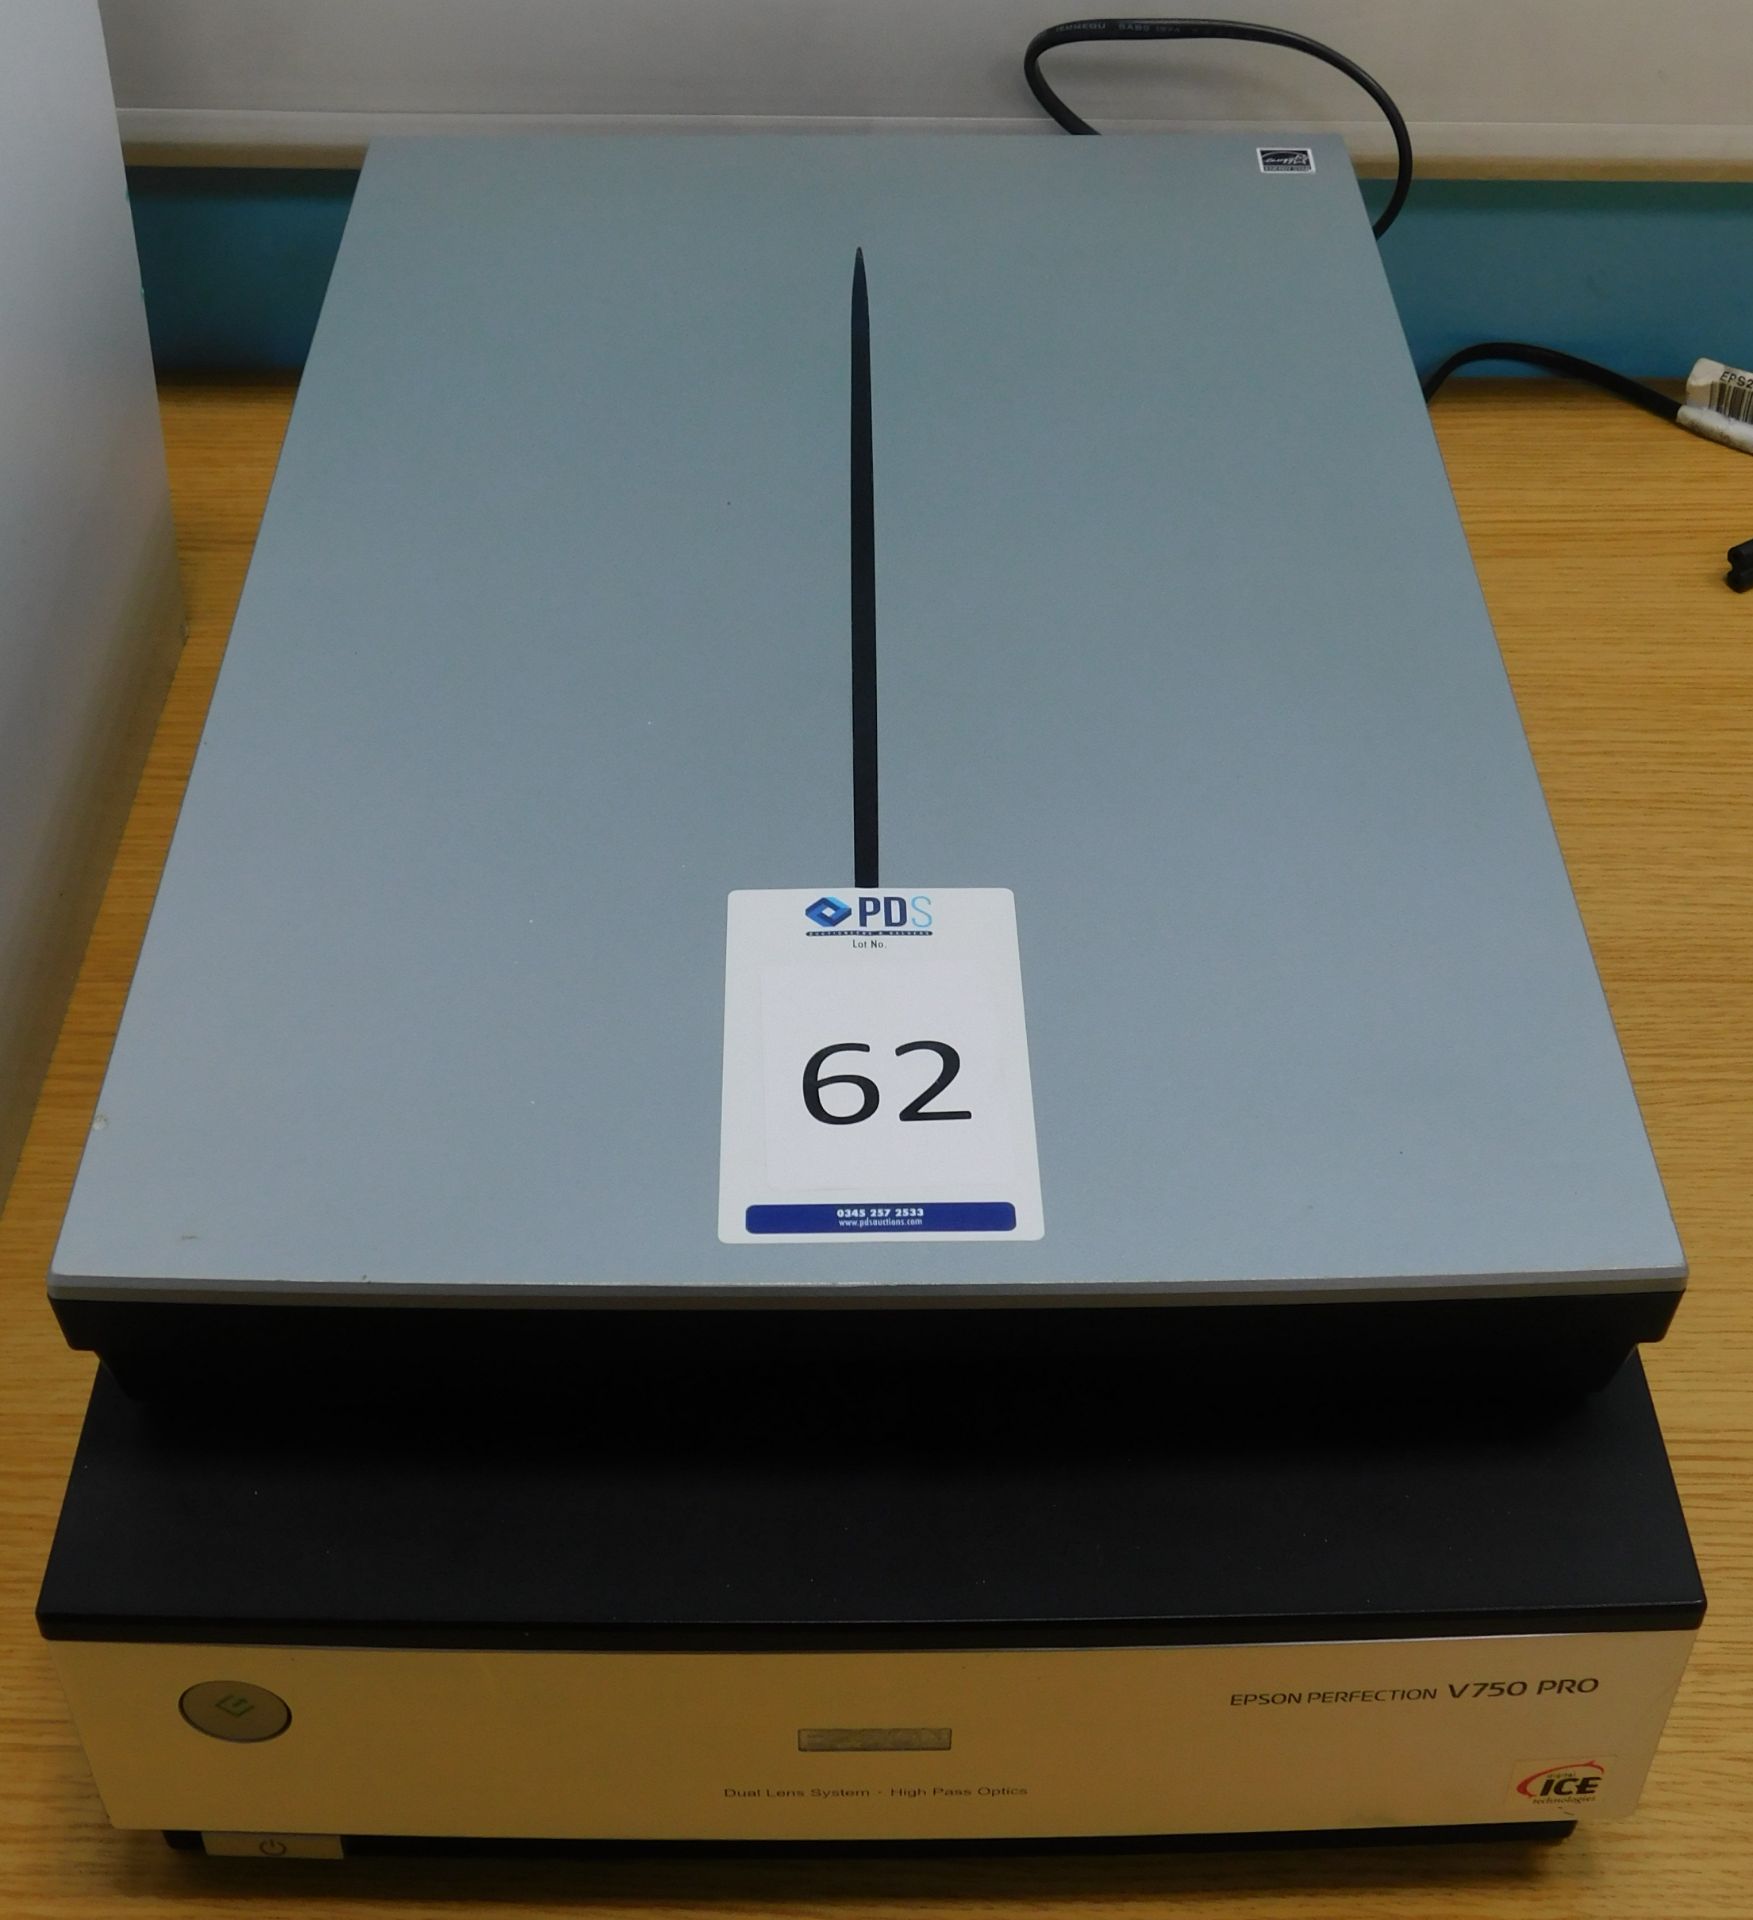 Epson Perfect V750 Pro Photo Scanner, Serial Number G78W023058 (Location: Hatfield - See General